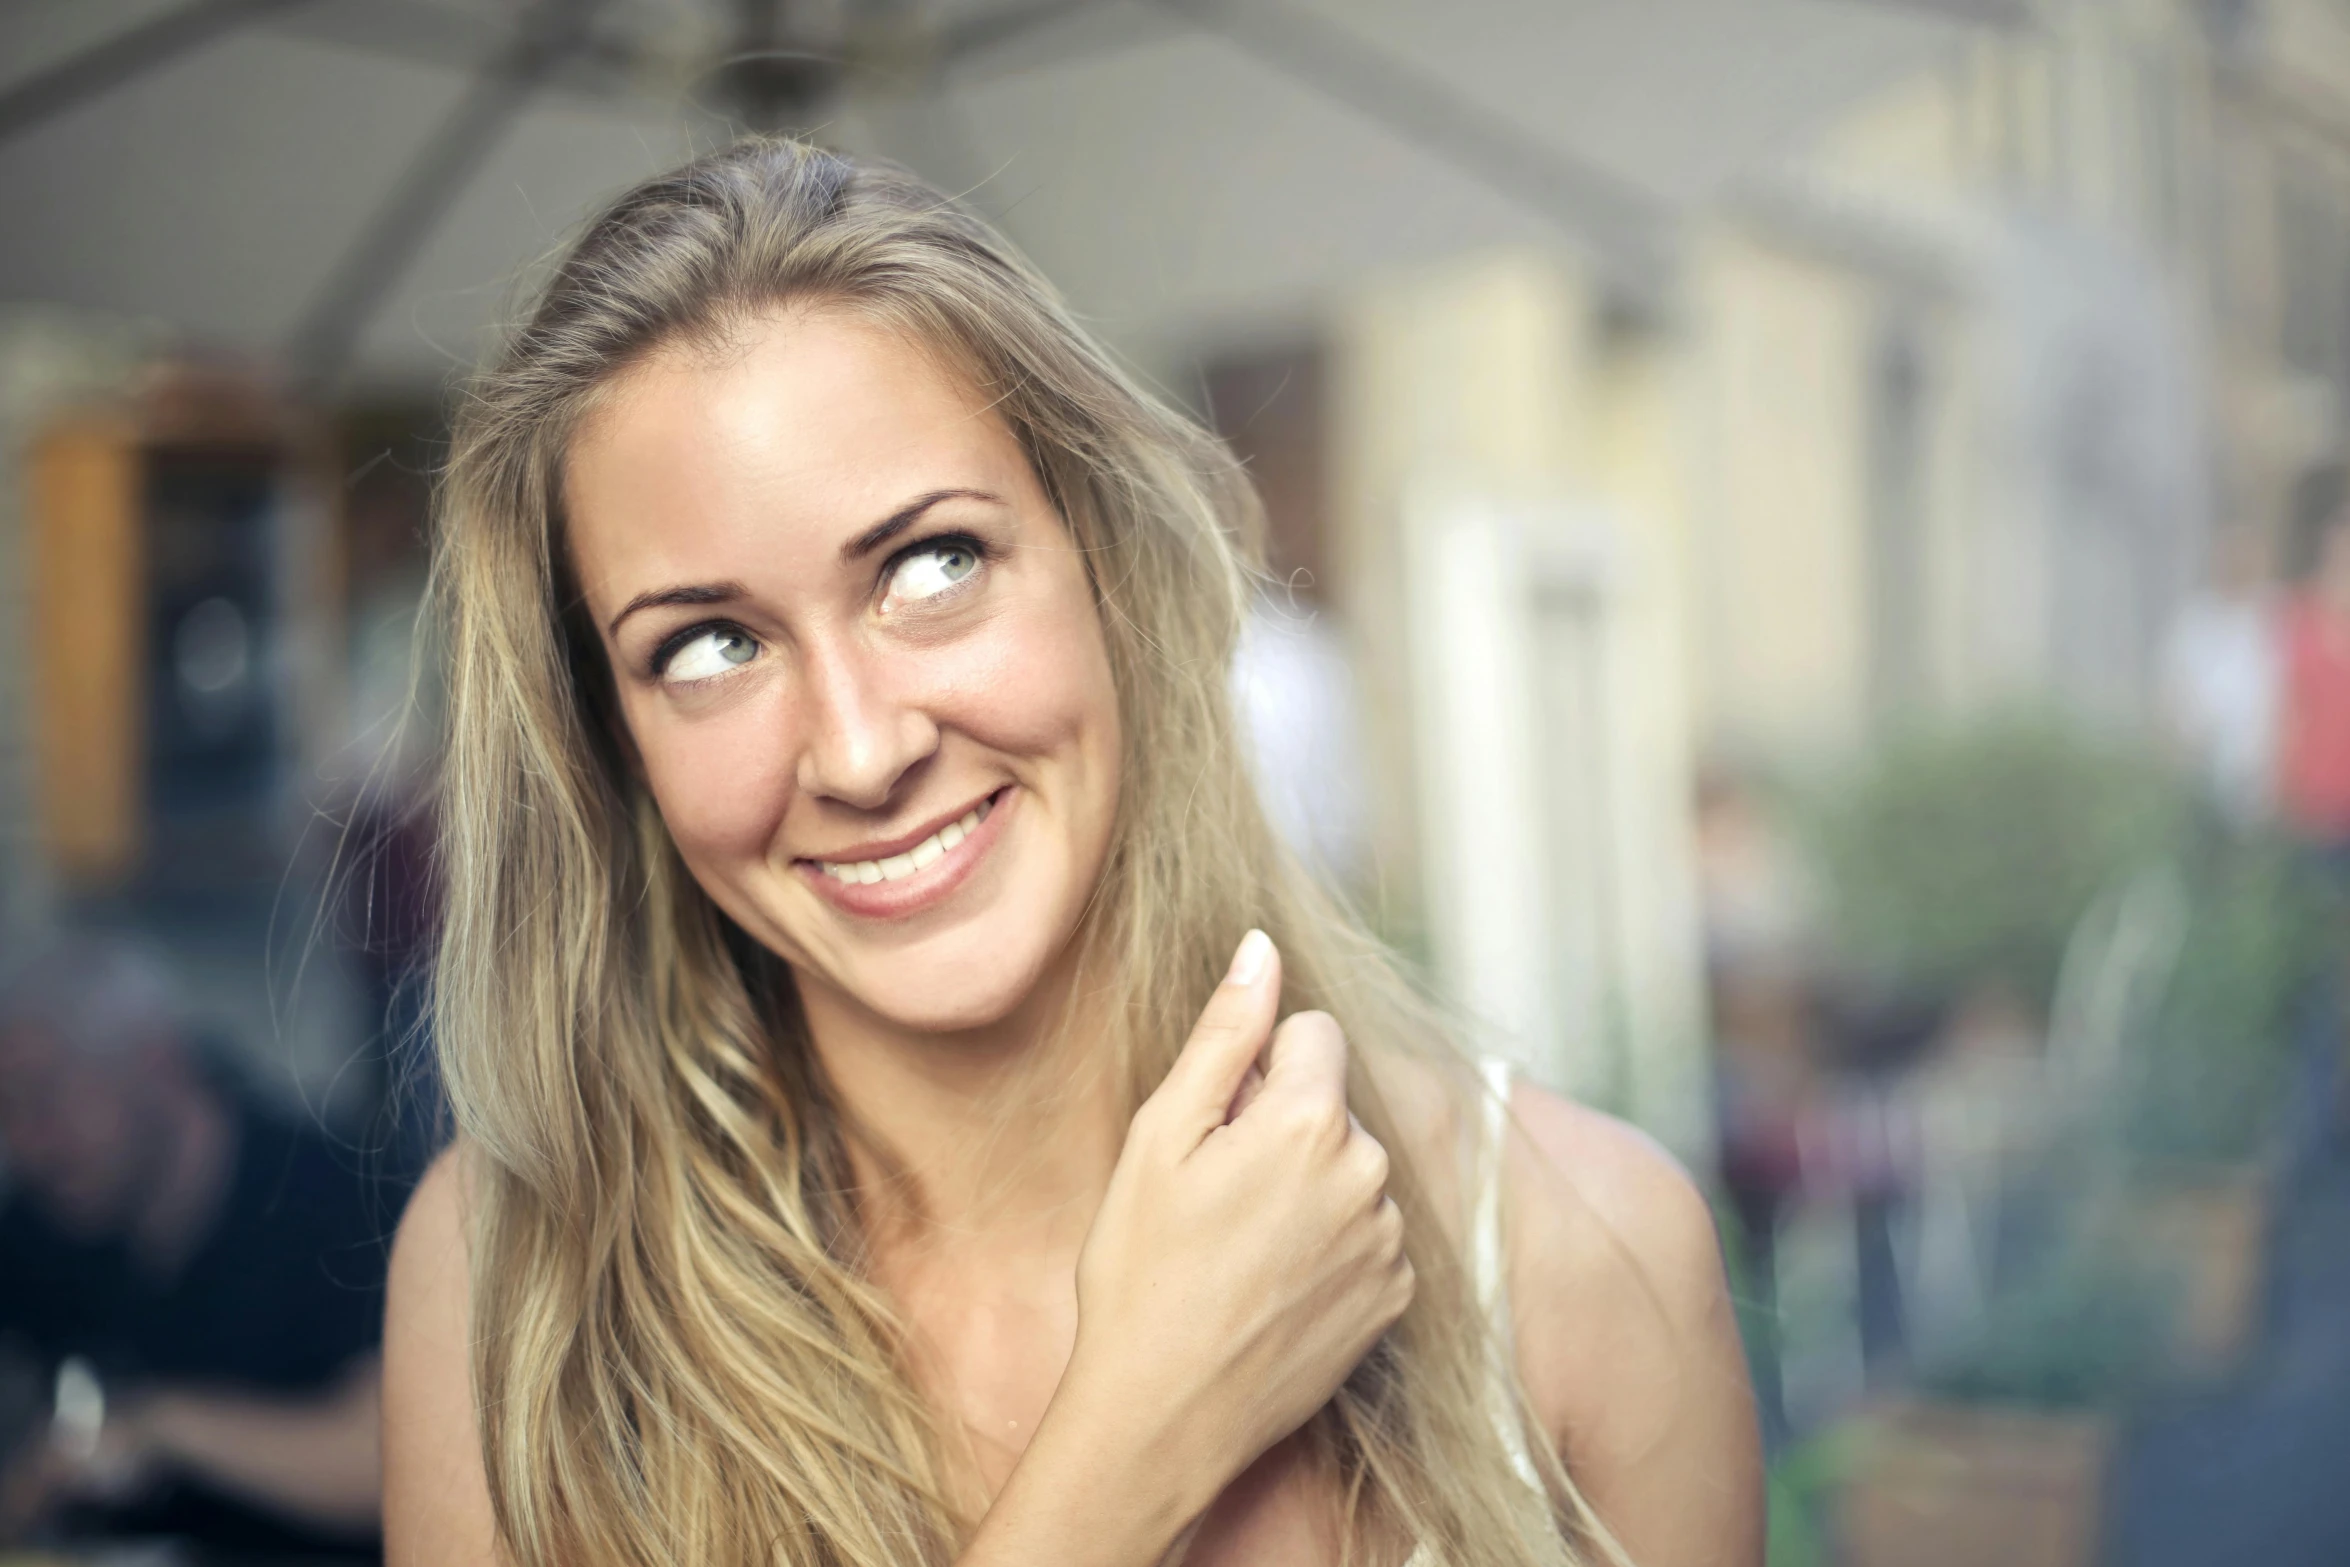 a woman with long blonde hair smiling at the camera, pexels contest winner, happening, looking across the shoulder, looking up at camera, european woman photograph, mischievous grin